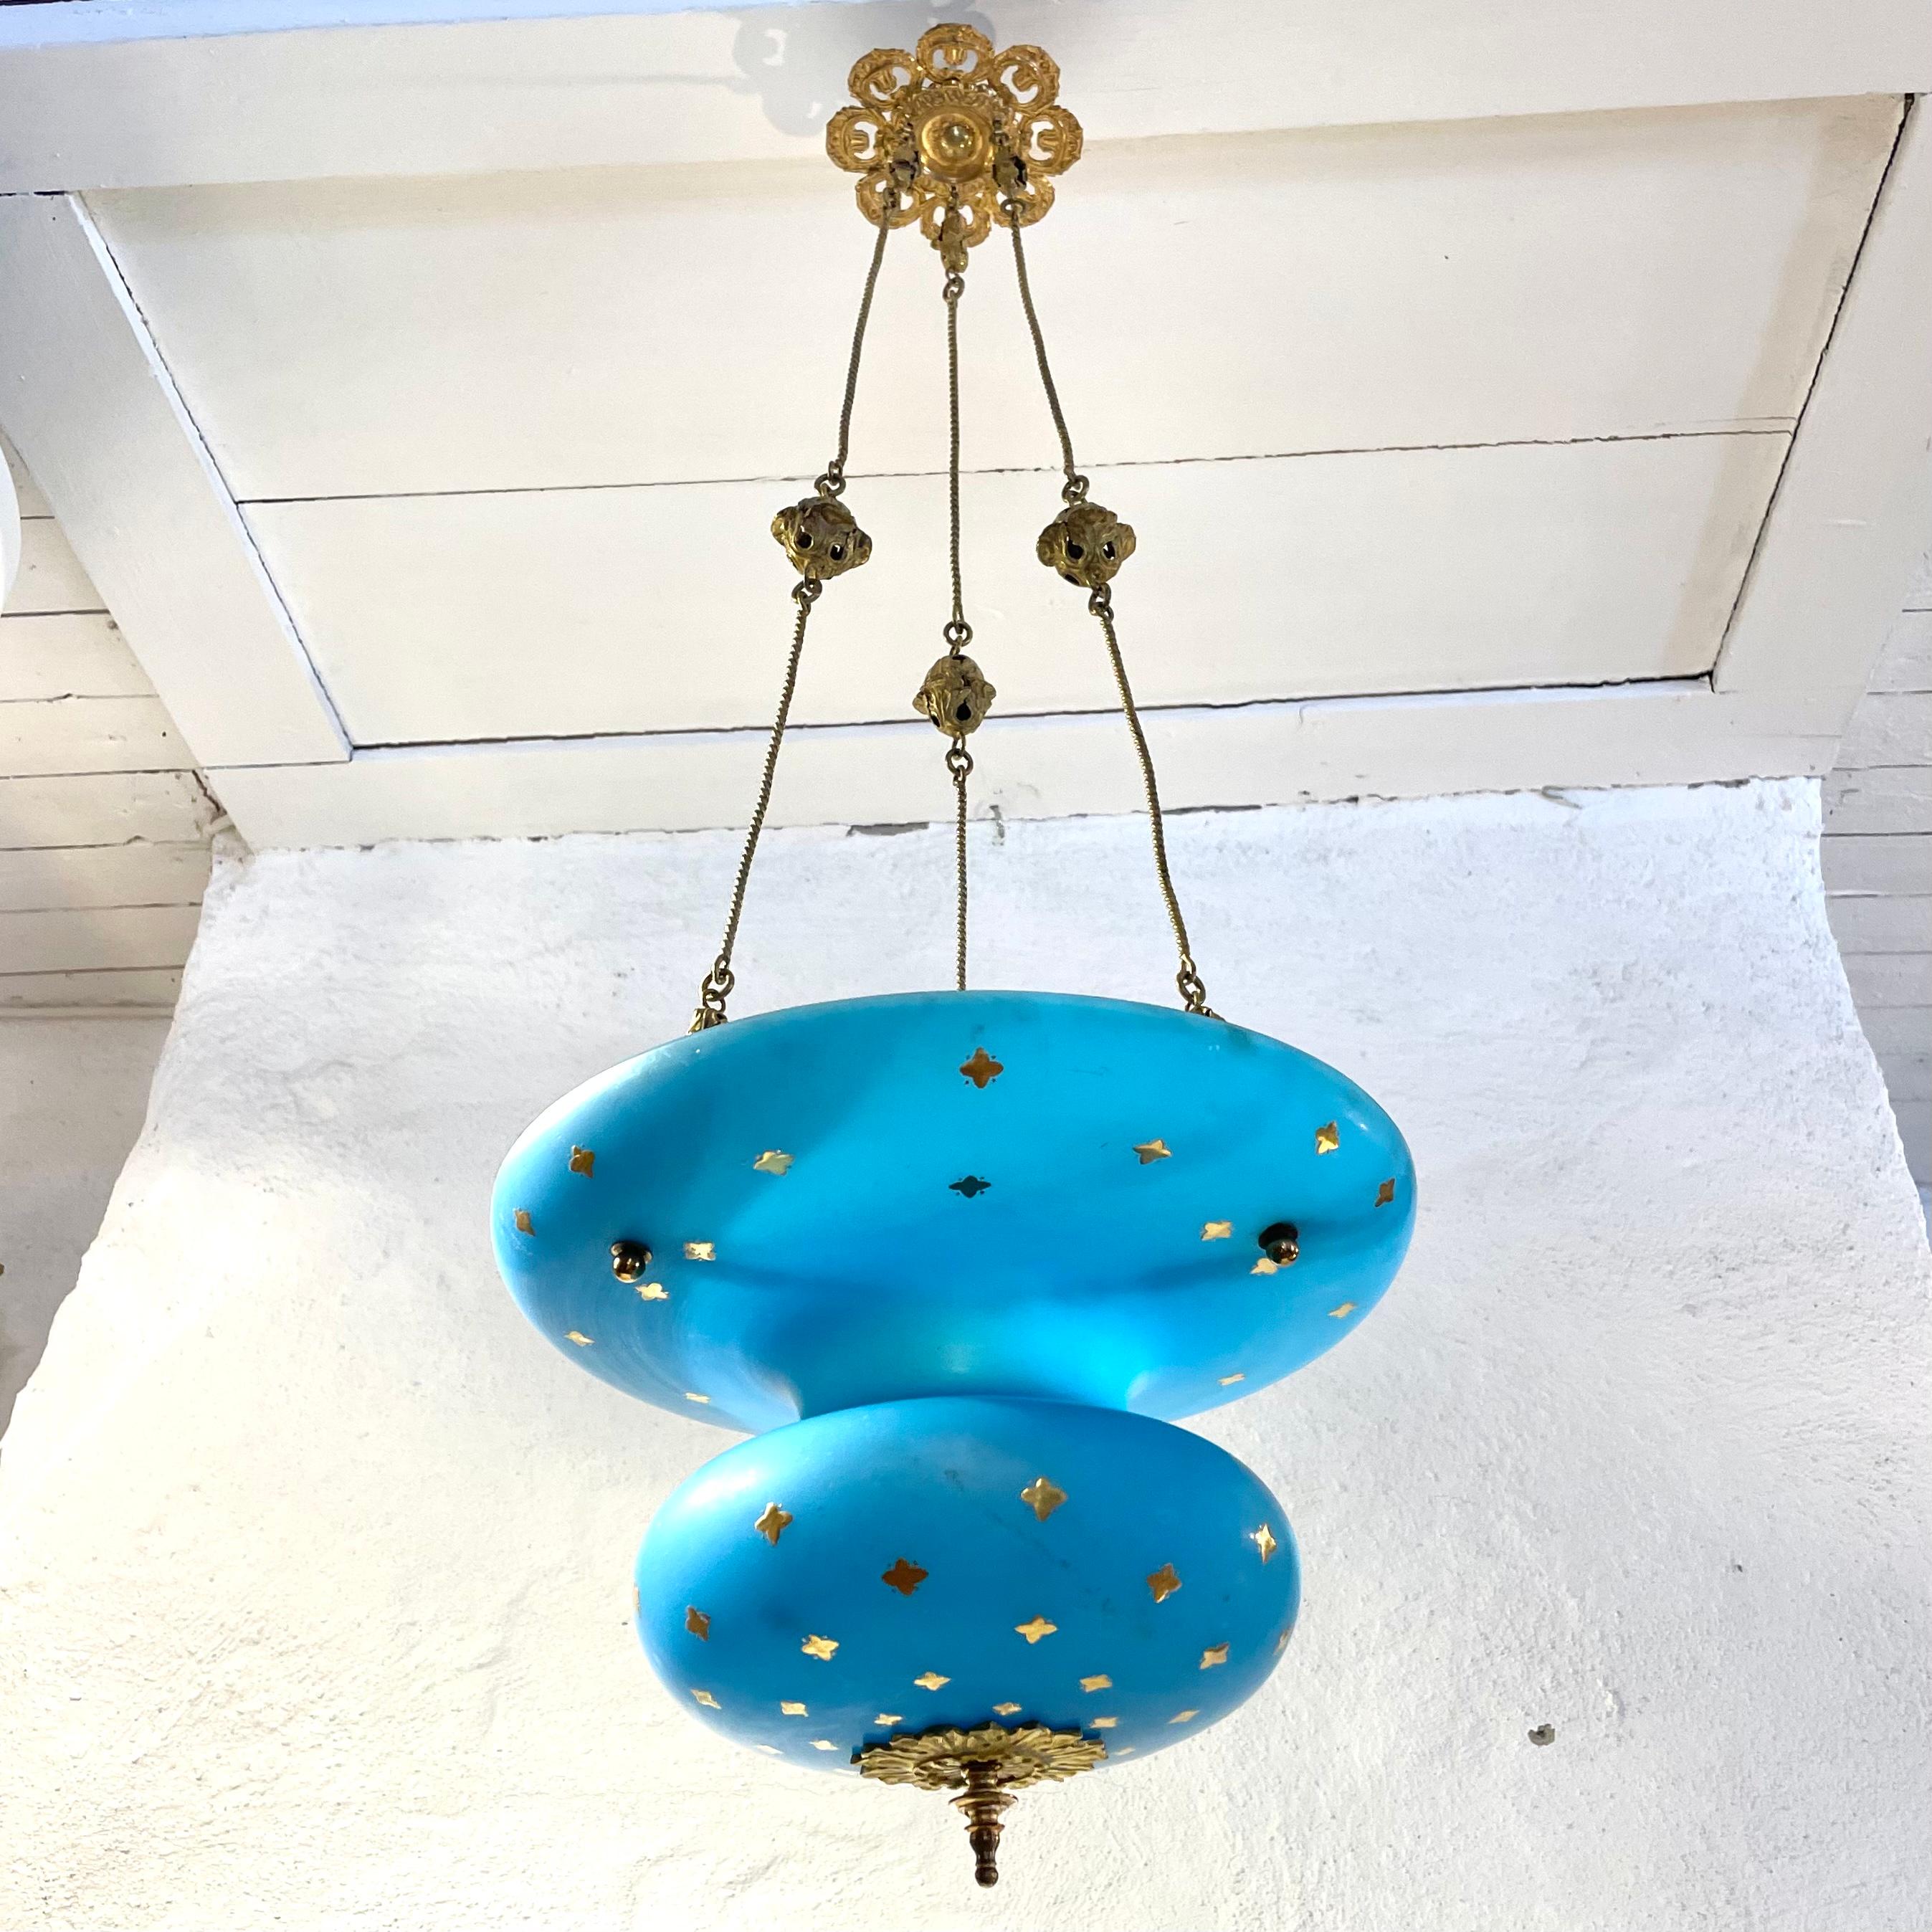 Beautiful hanging chandelier for a candle in opaline glass from the 1840s. Very cool color on the opaline glass with details in brass and gilded flowers.

The chandelier has never been electrified, only the original candle holder in the